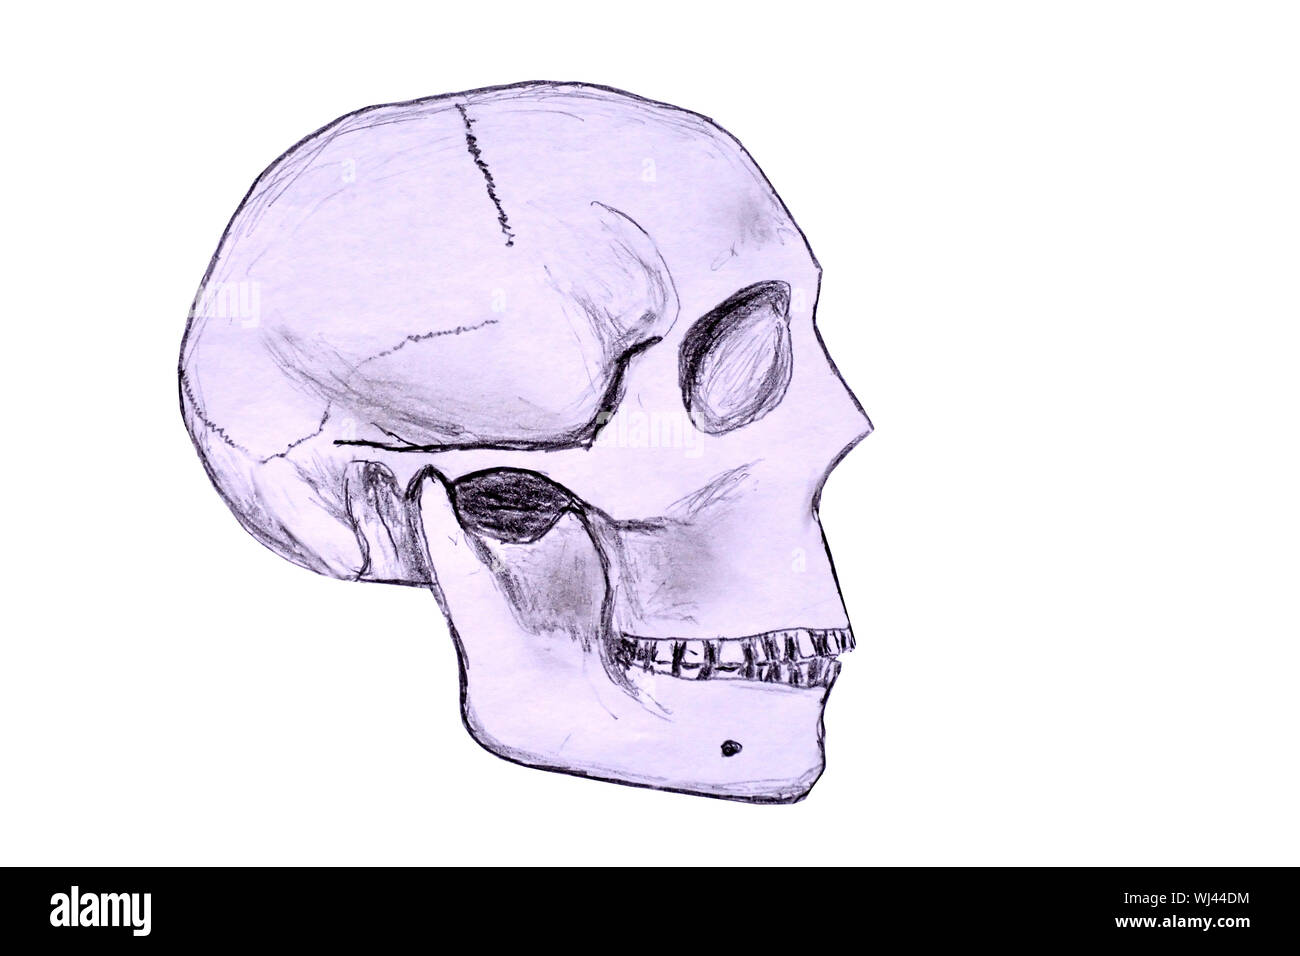 Sketch of a human skull in profile viewed from the right hand side. Isolated against a white background. Stock Photo